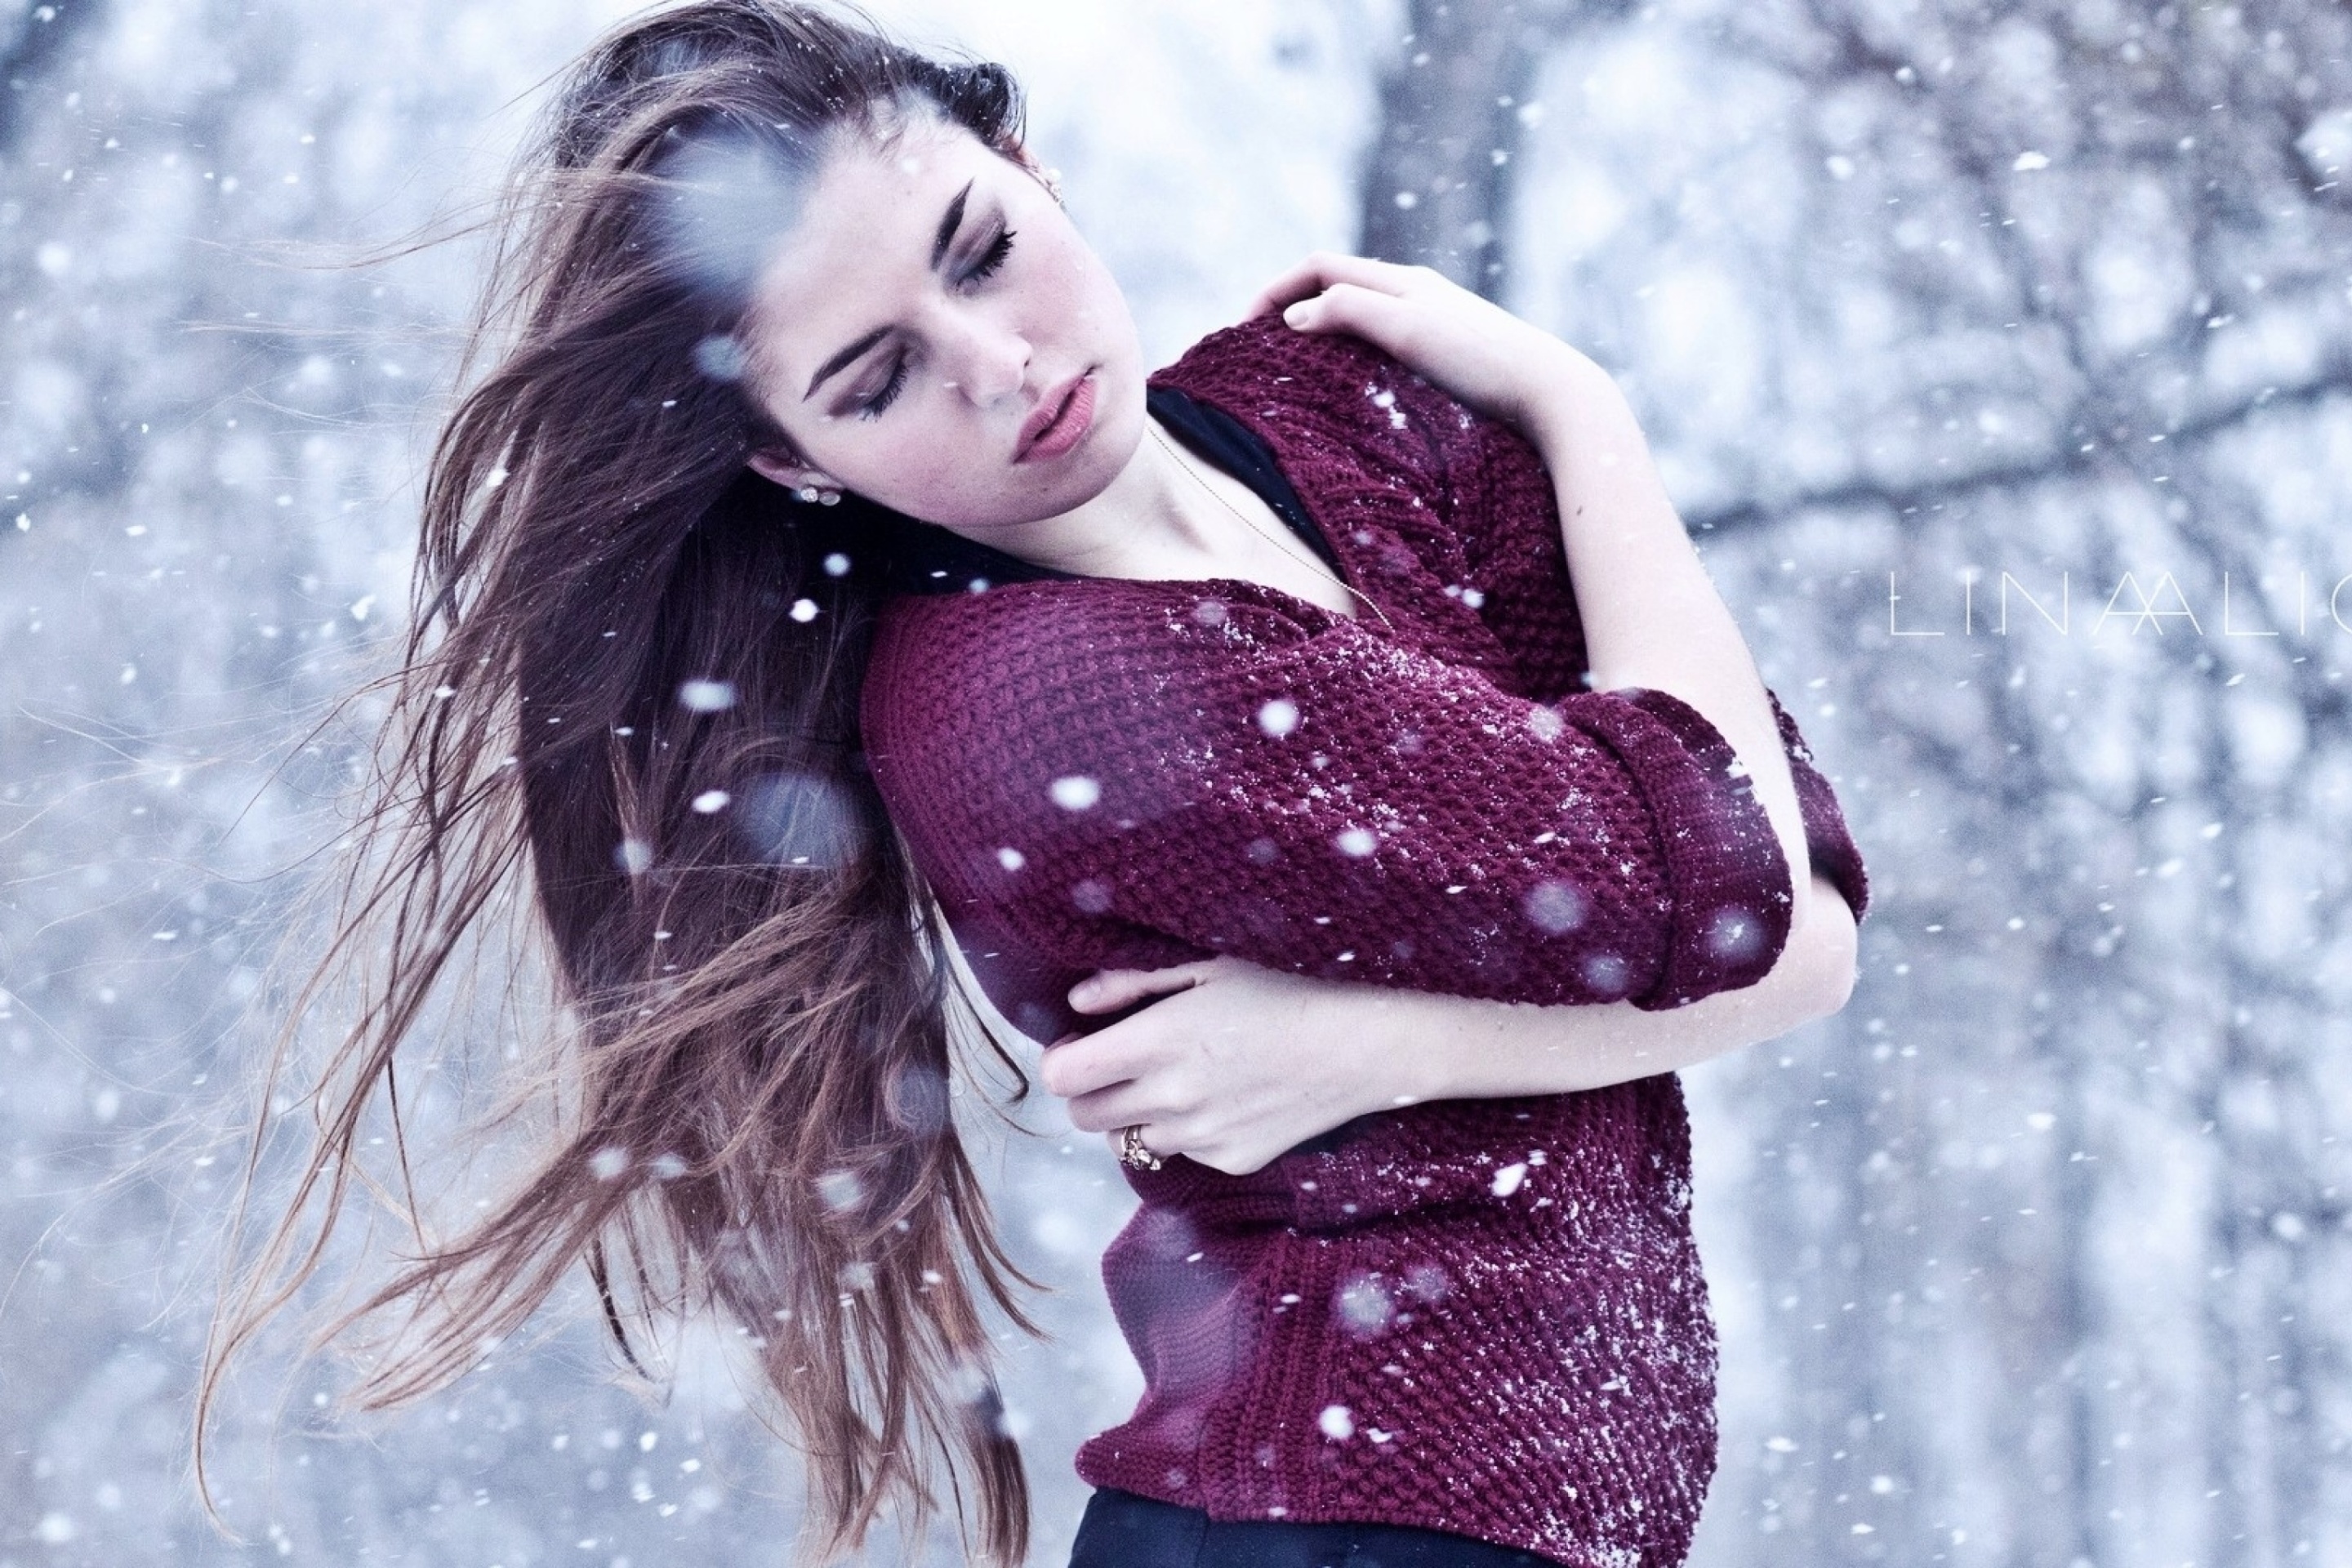 Girl from a winter poem wallpaper 2880x1920